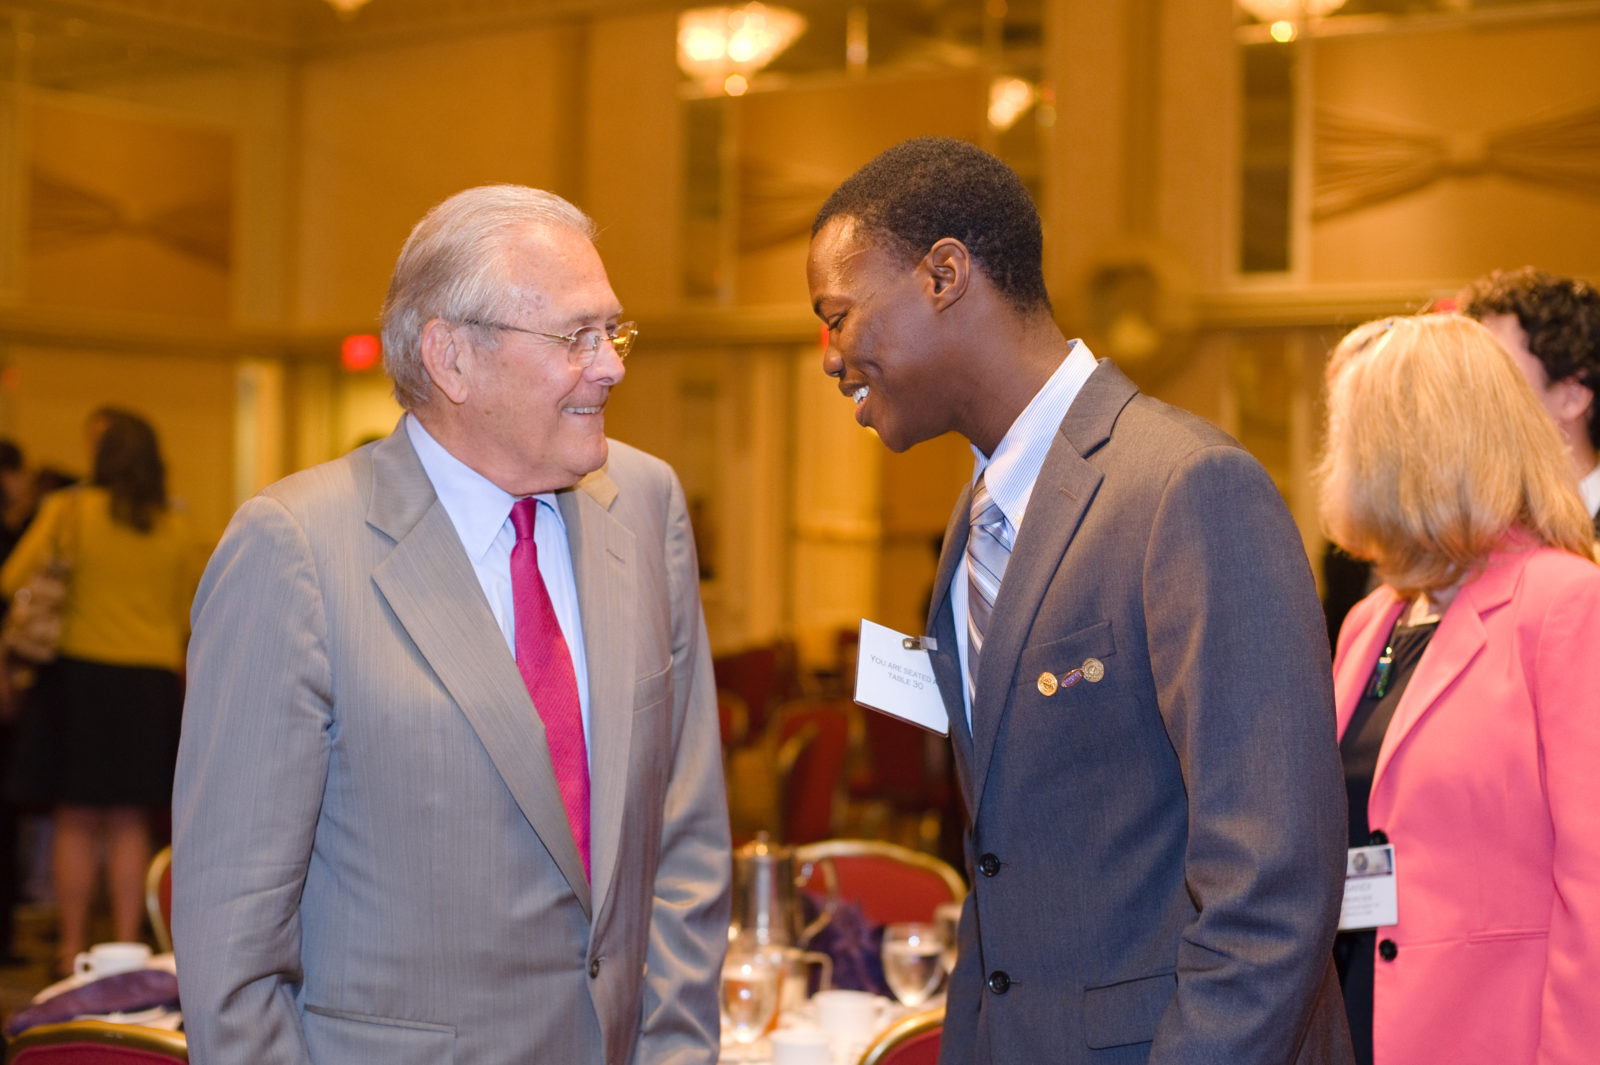 ICPES student Housseine M. Heimid (r.) meets former Defense Secretary Donald Rumsfeld during the annual TFAS Judd Award luncheon.